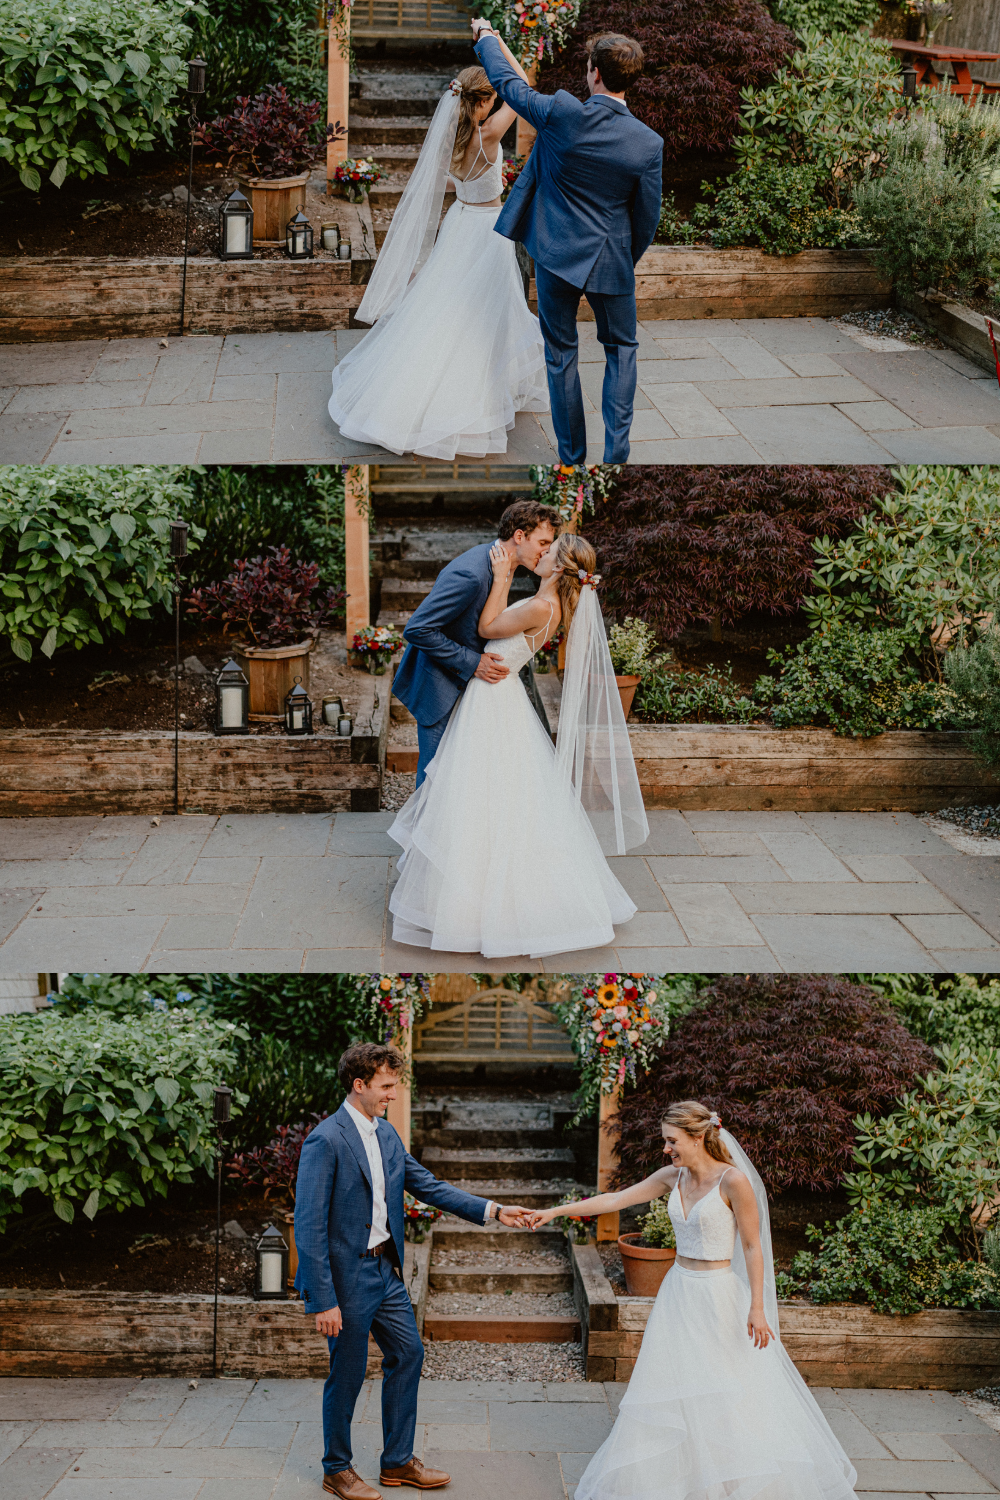 First dance photography after intimate backyard wedding elopement with flower arch outdoor and bride and groom dance | Washington State Elopement Photographer, Seattle Elopement Photographer, Newlywed Elopement Photographer, Quarantine Wedding Elopement Inspiration | chelseaabril.com